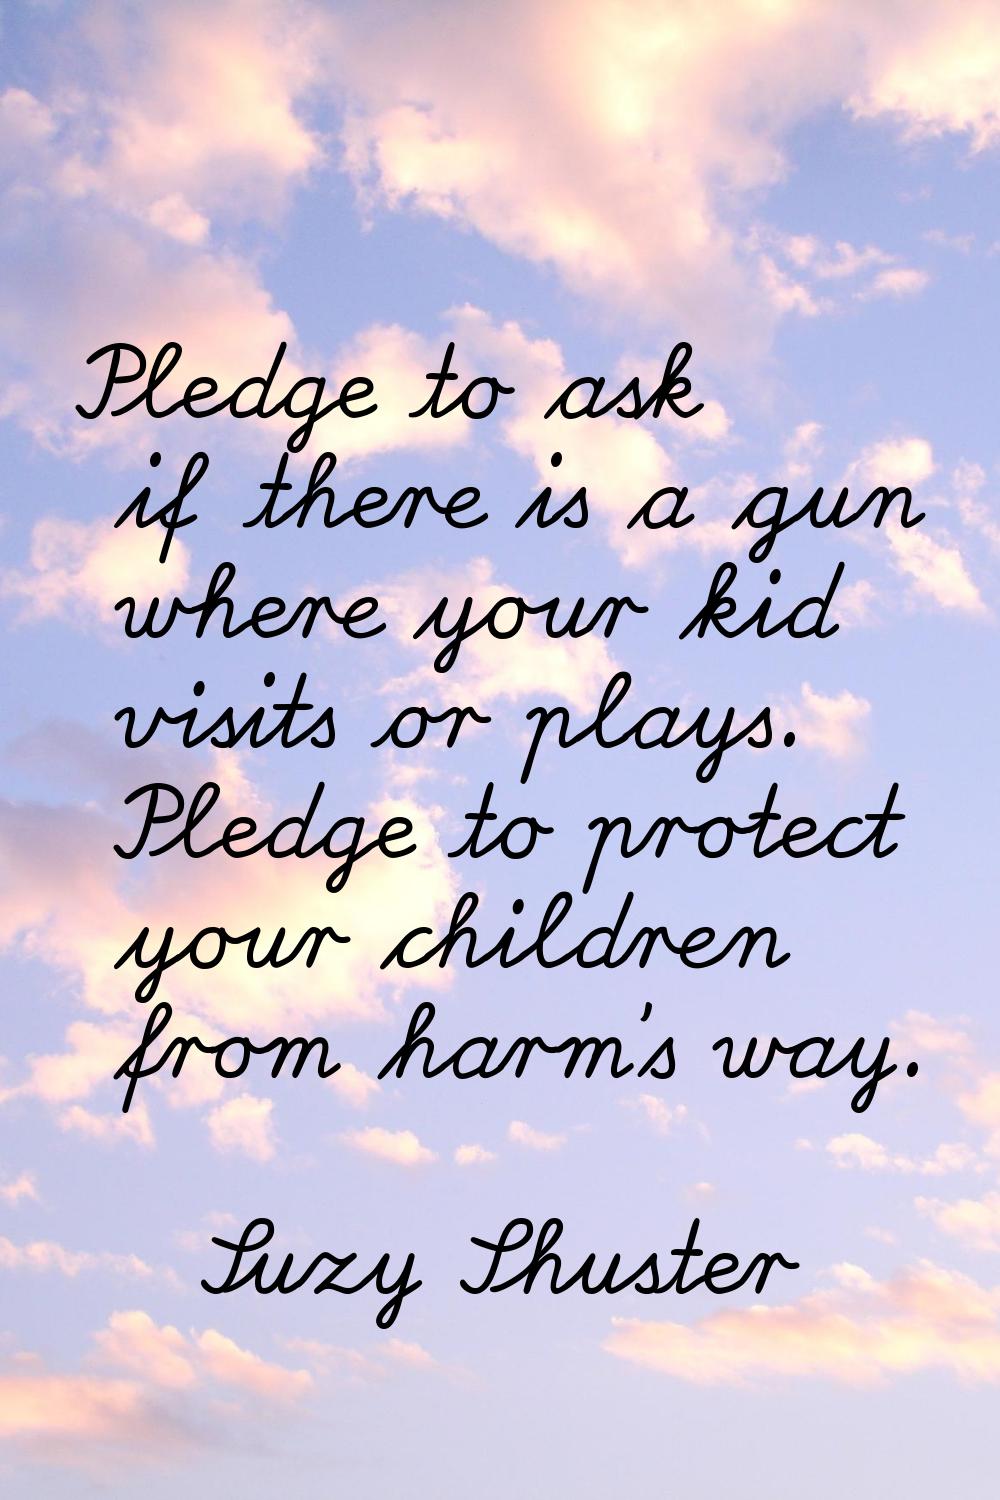 Pledge to ask if there is a gun where your kid visits or plays. Pledge to protect your children fro